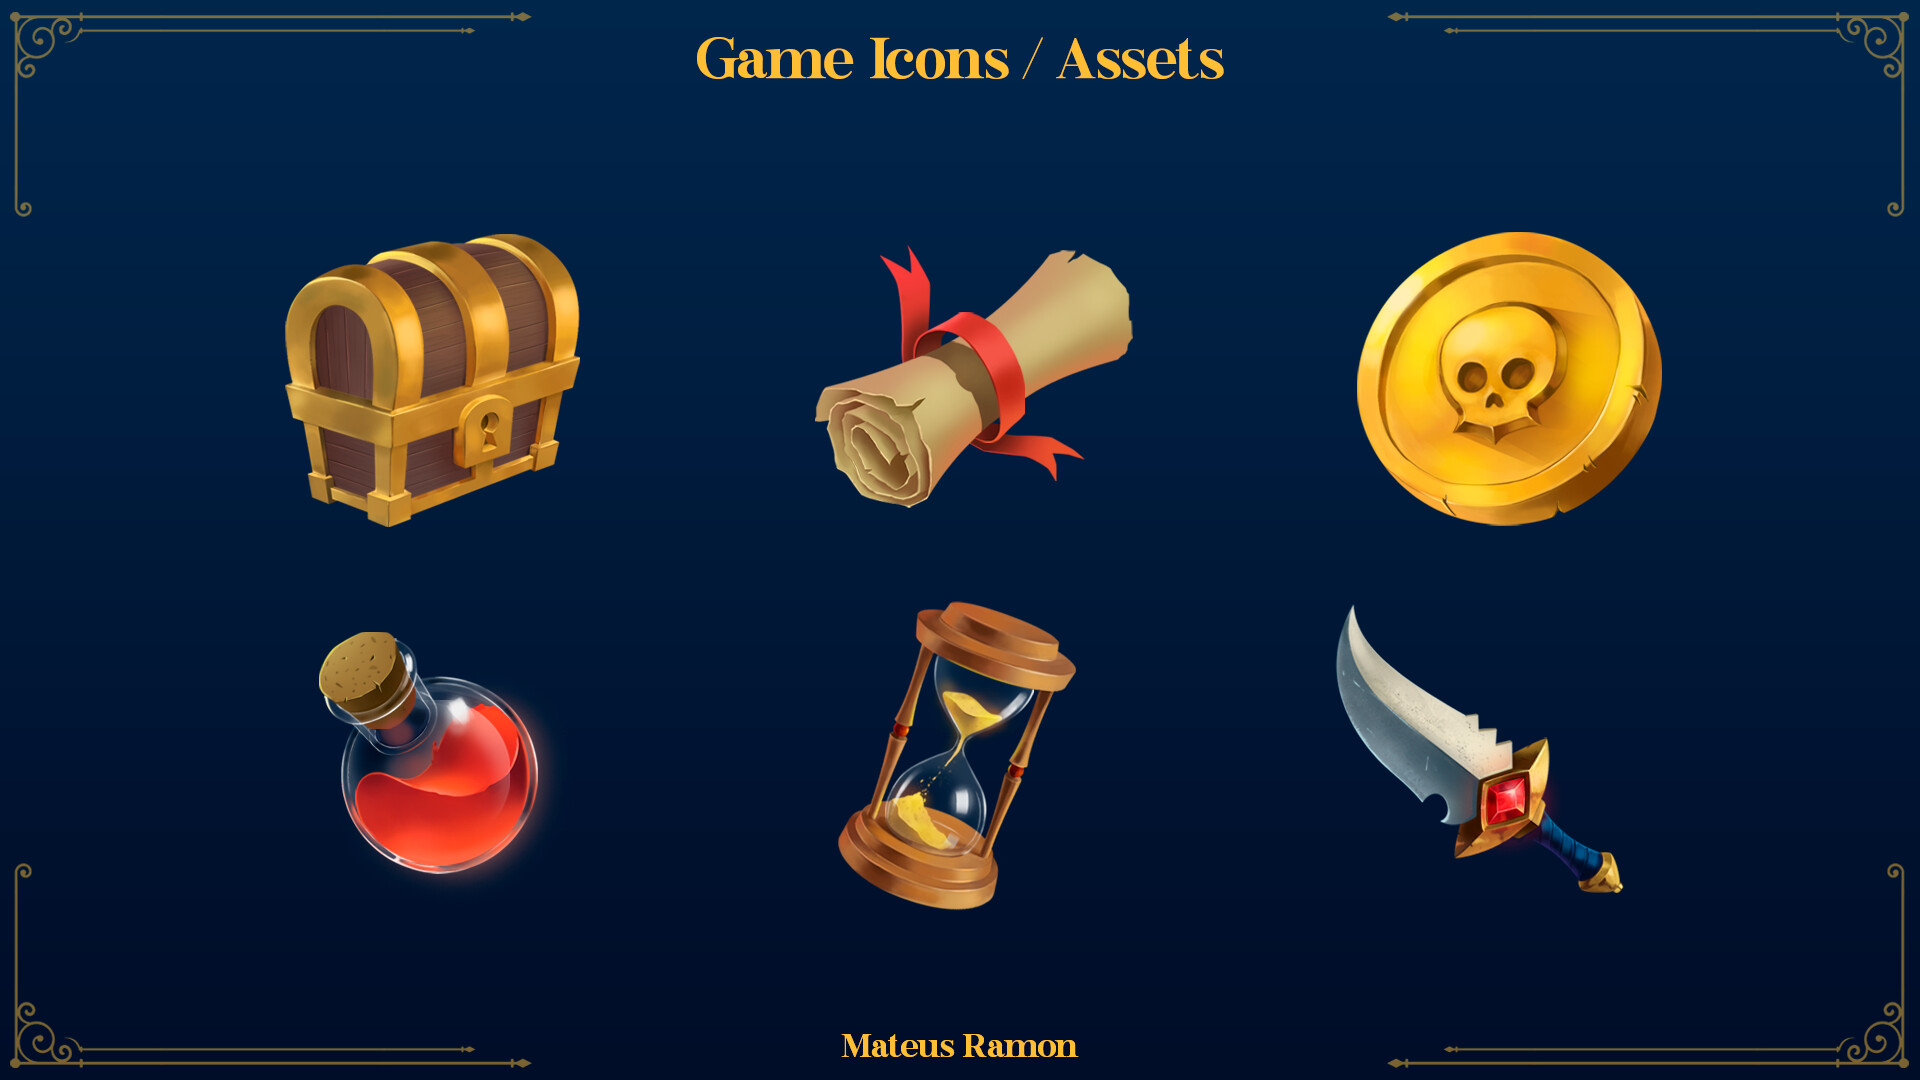 ArtStation - Game Icons / Assets